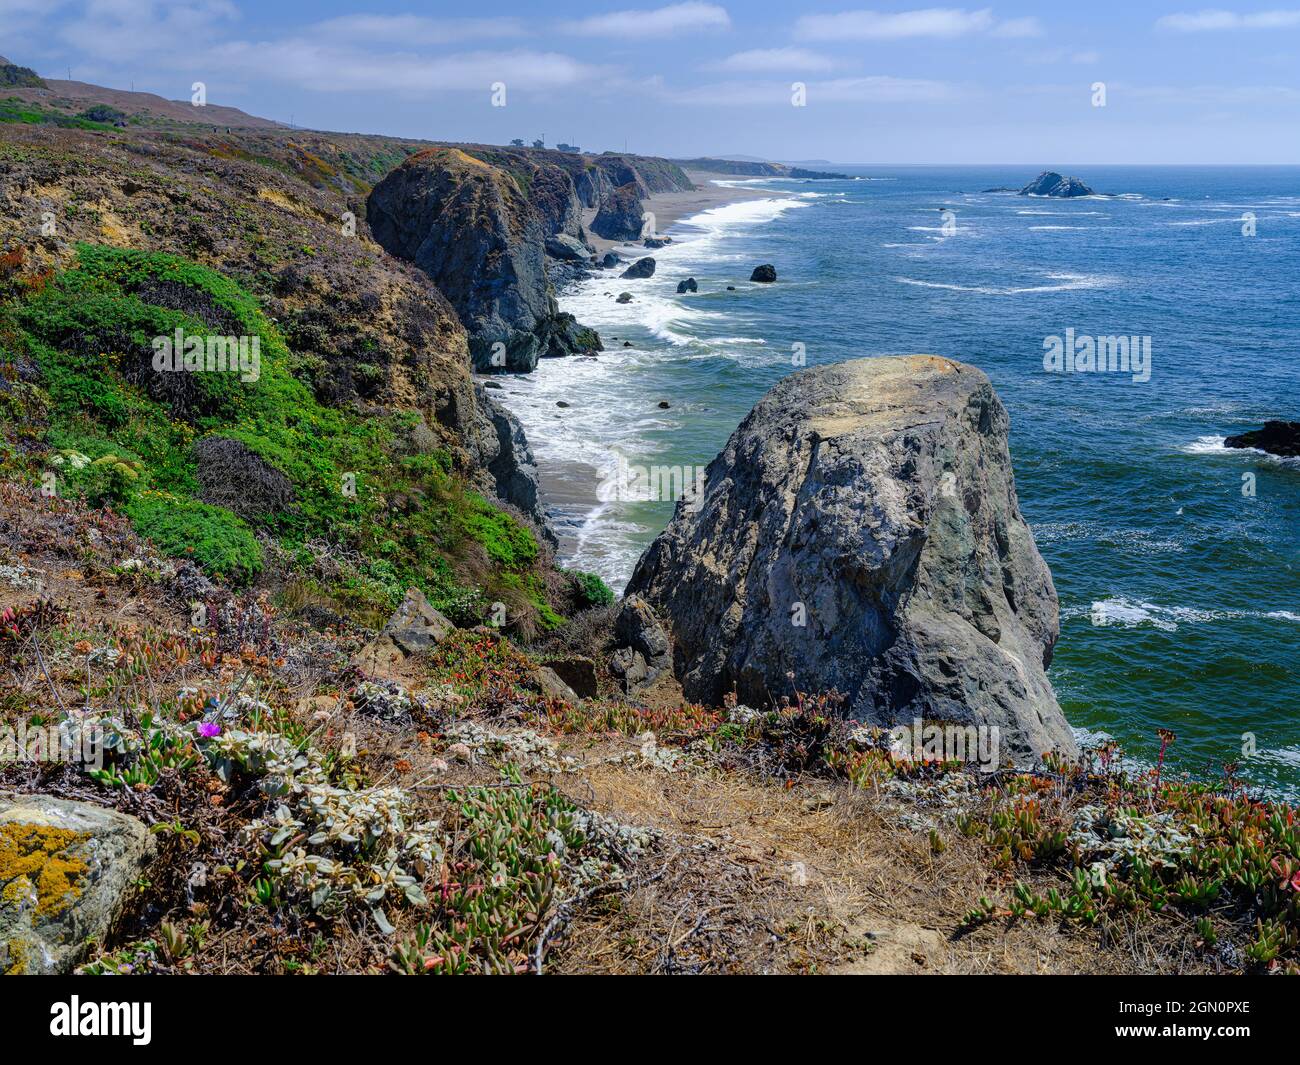 This is the ineffable Bodega Bay Area, miles and miles of quiet beaches with an ethereal and beautiful appeal. Stock Photo